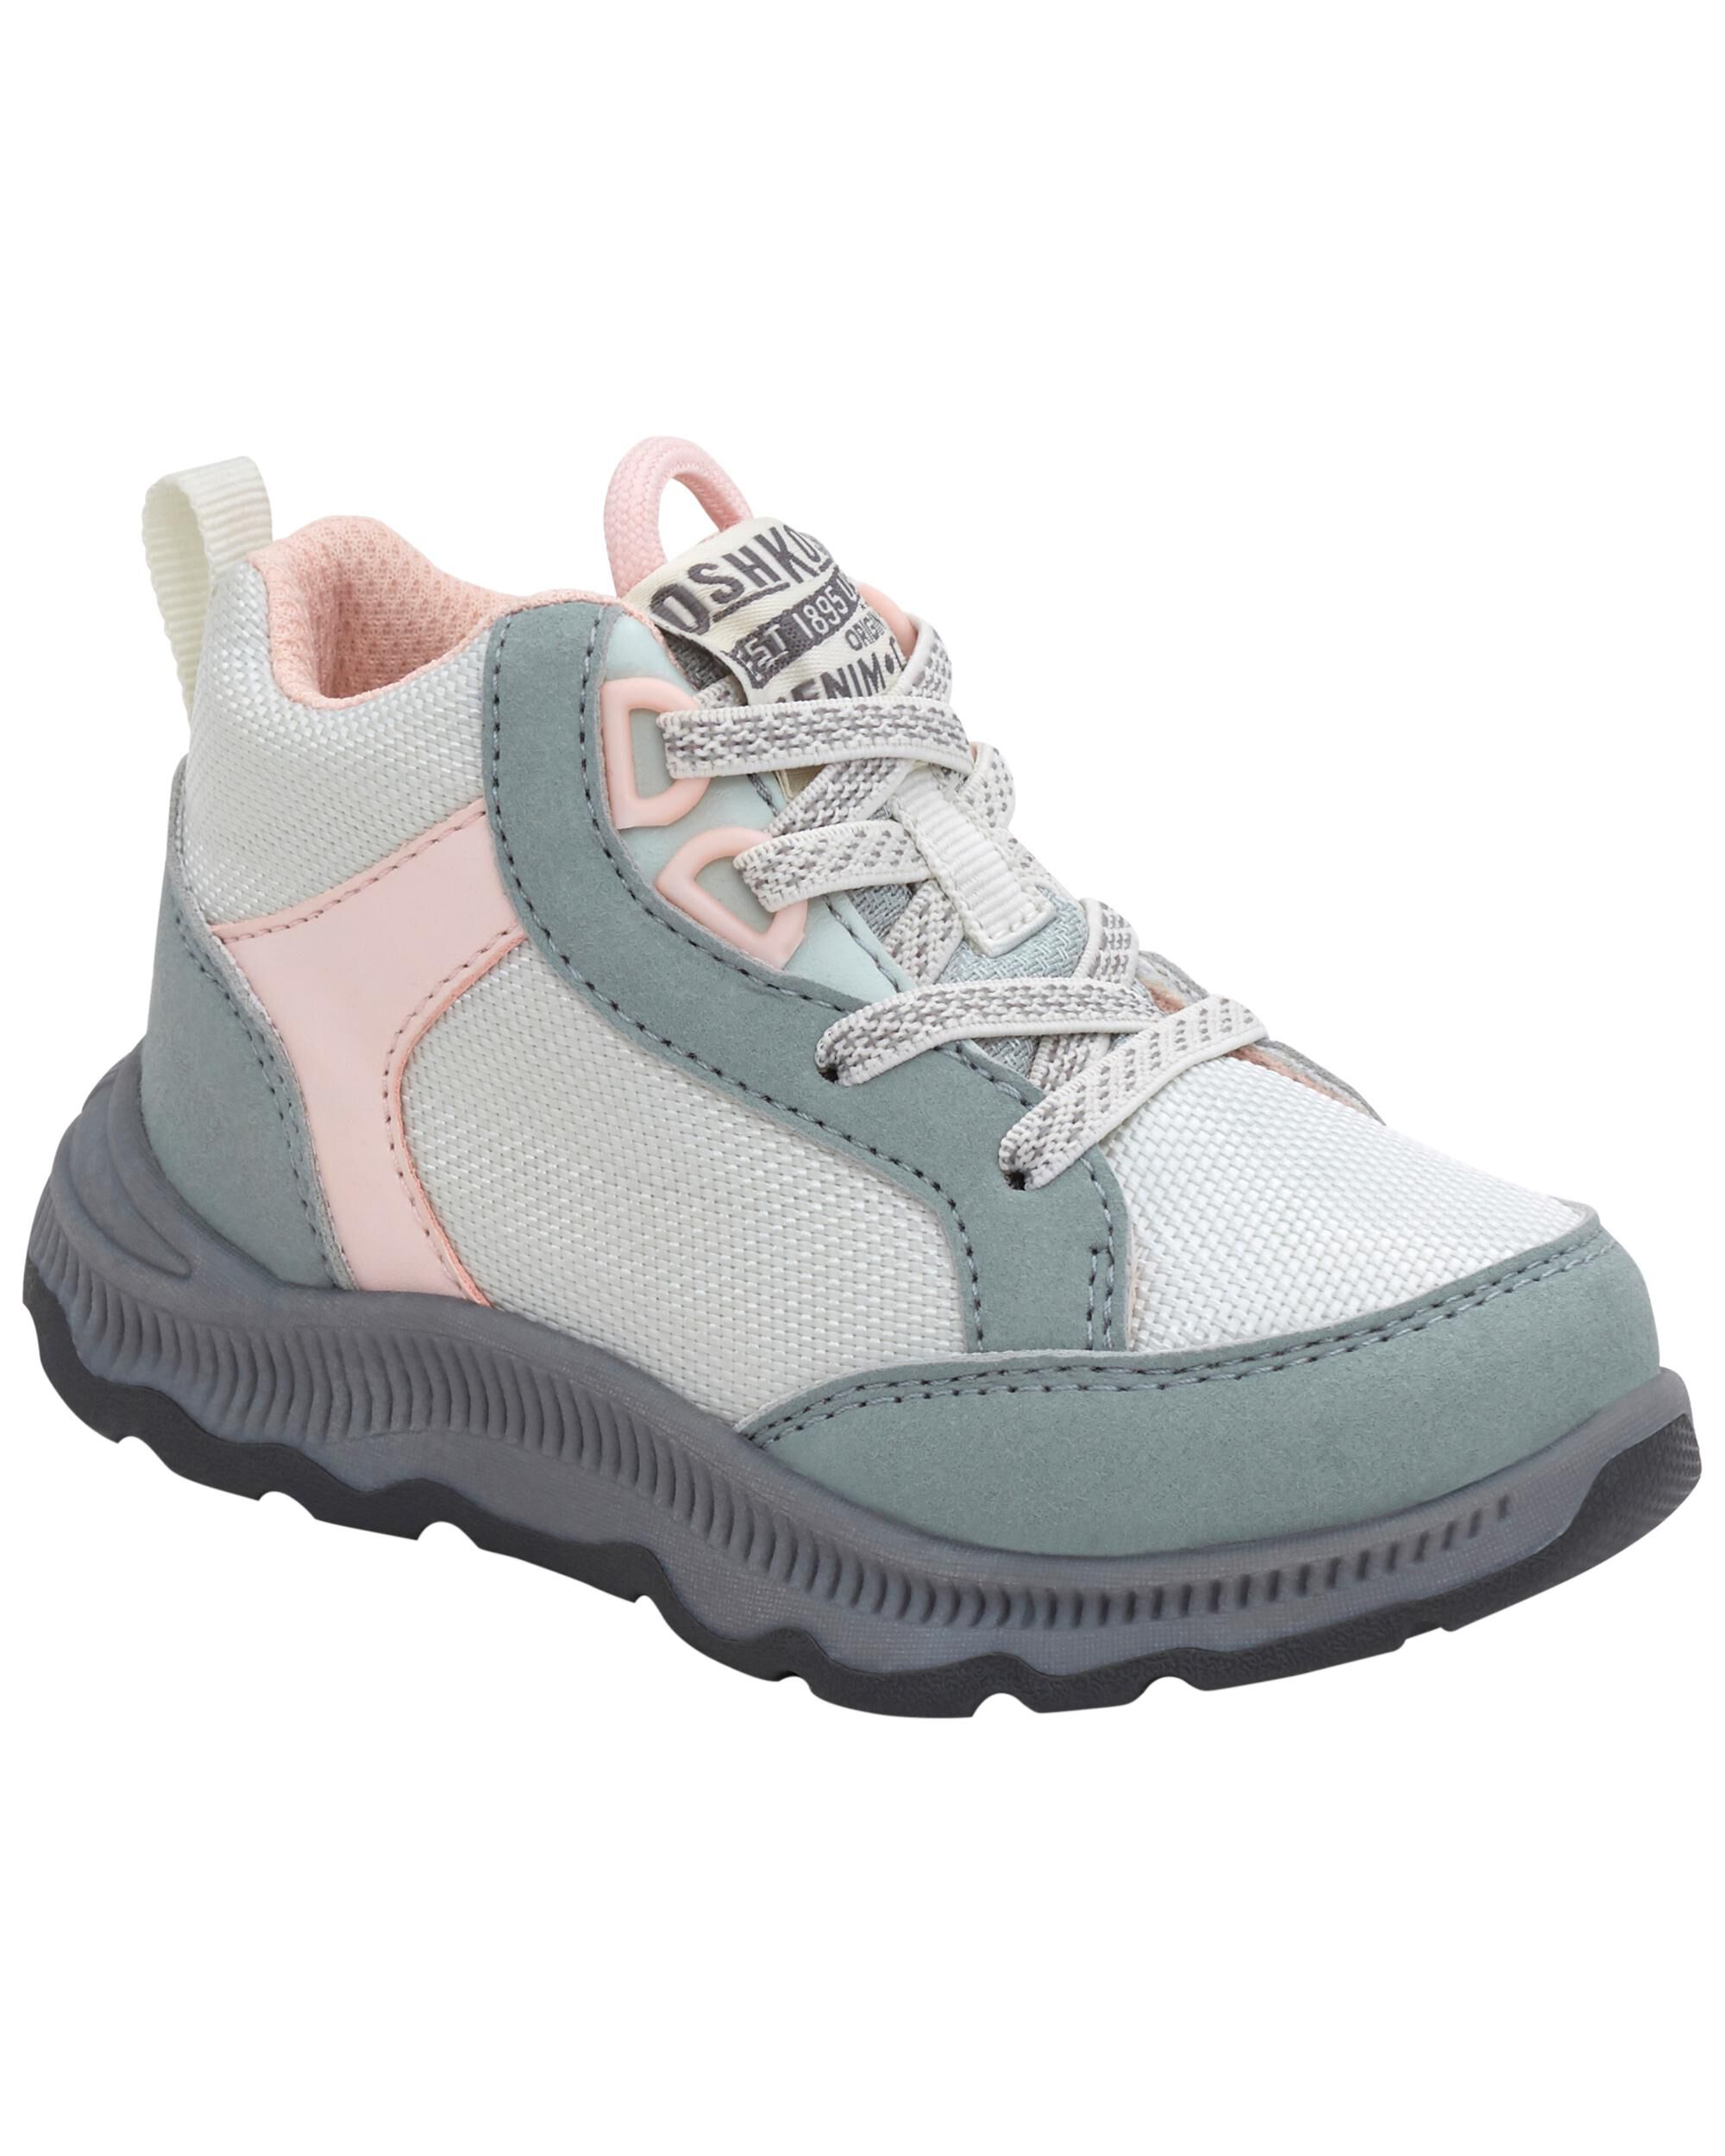 Carters Toddler Recycled Hiking Boots